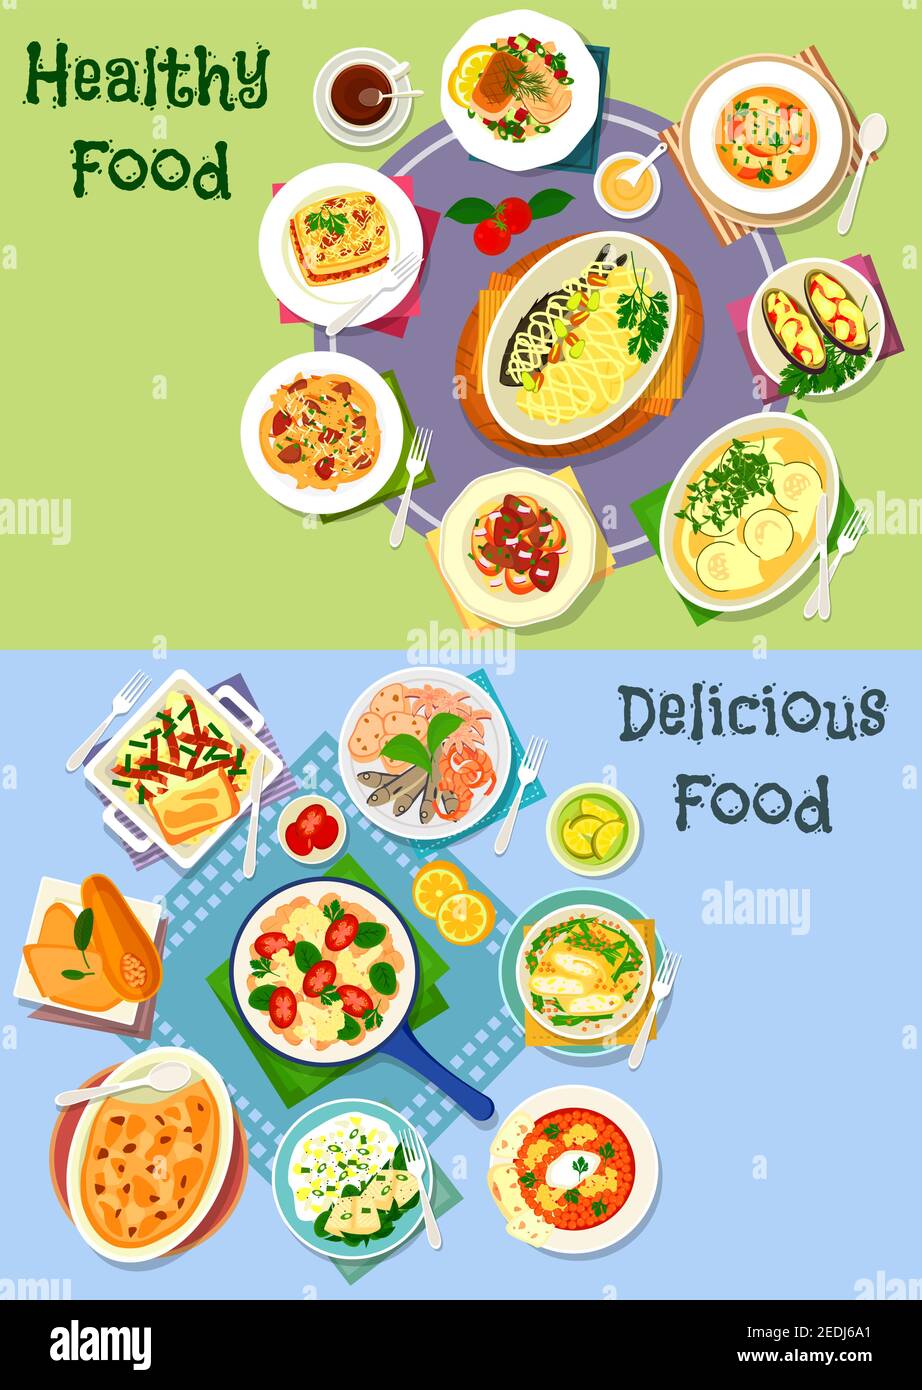 Nutritious dinner icon set of vegetable casserole with meat, cheese and sausage, grilled seafood, fried fish with veggies salad, pasta with liver, pum Stock Vector